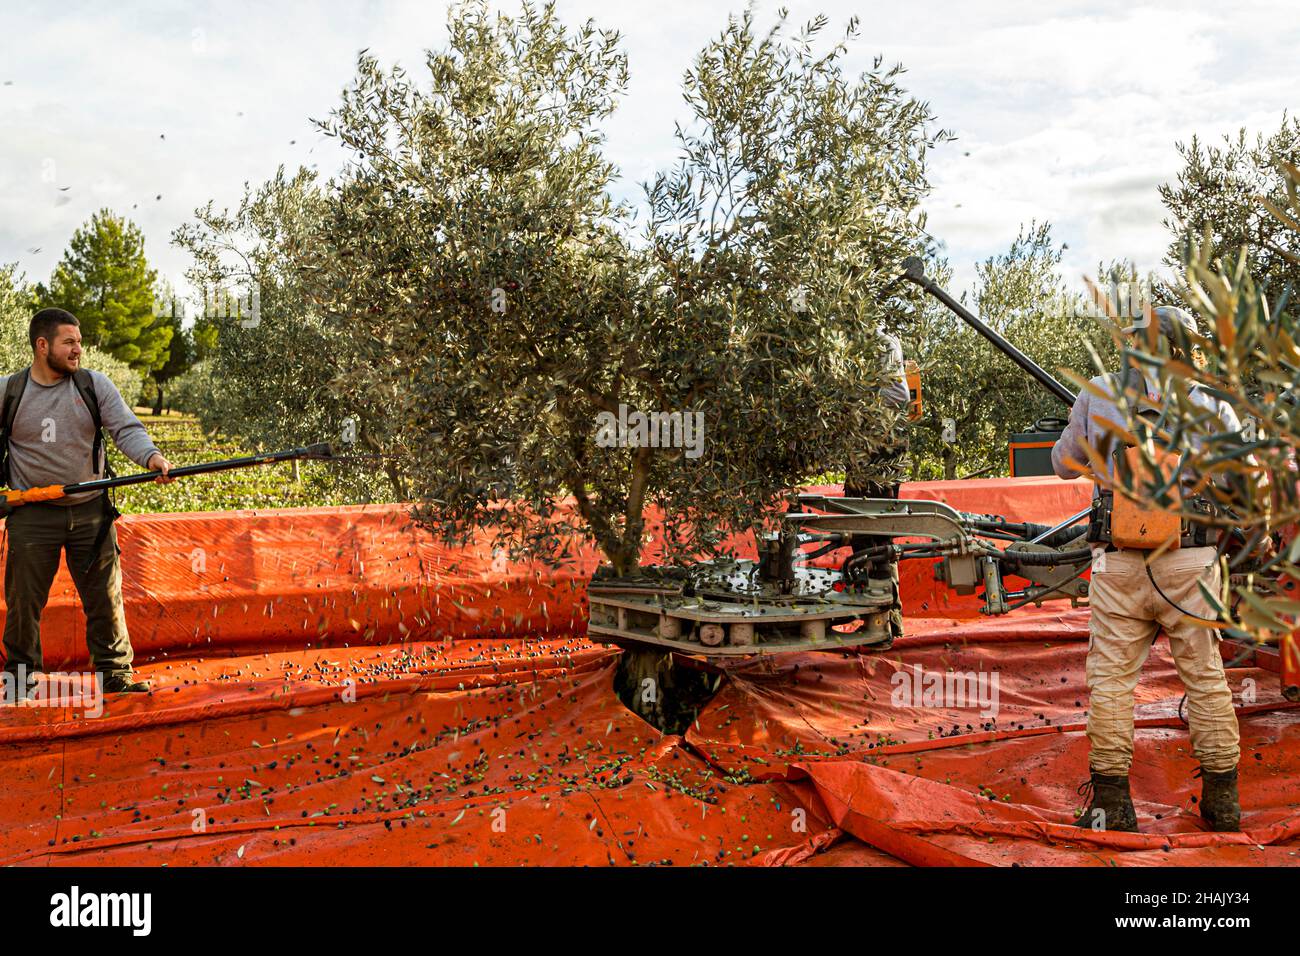 Olive harvest on the estate Chateau de Taurenne in Aups, France. Short but violent: the olive tree is mechanically shaken while at the same time two harvesters go through the leaves with the electric rakes Stock Photo